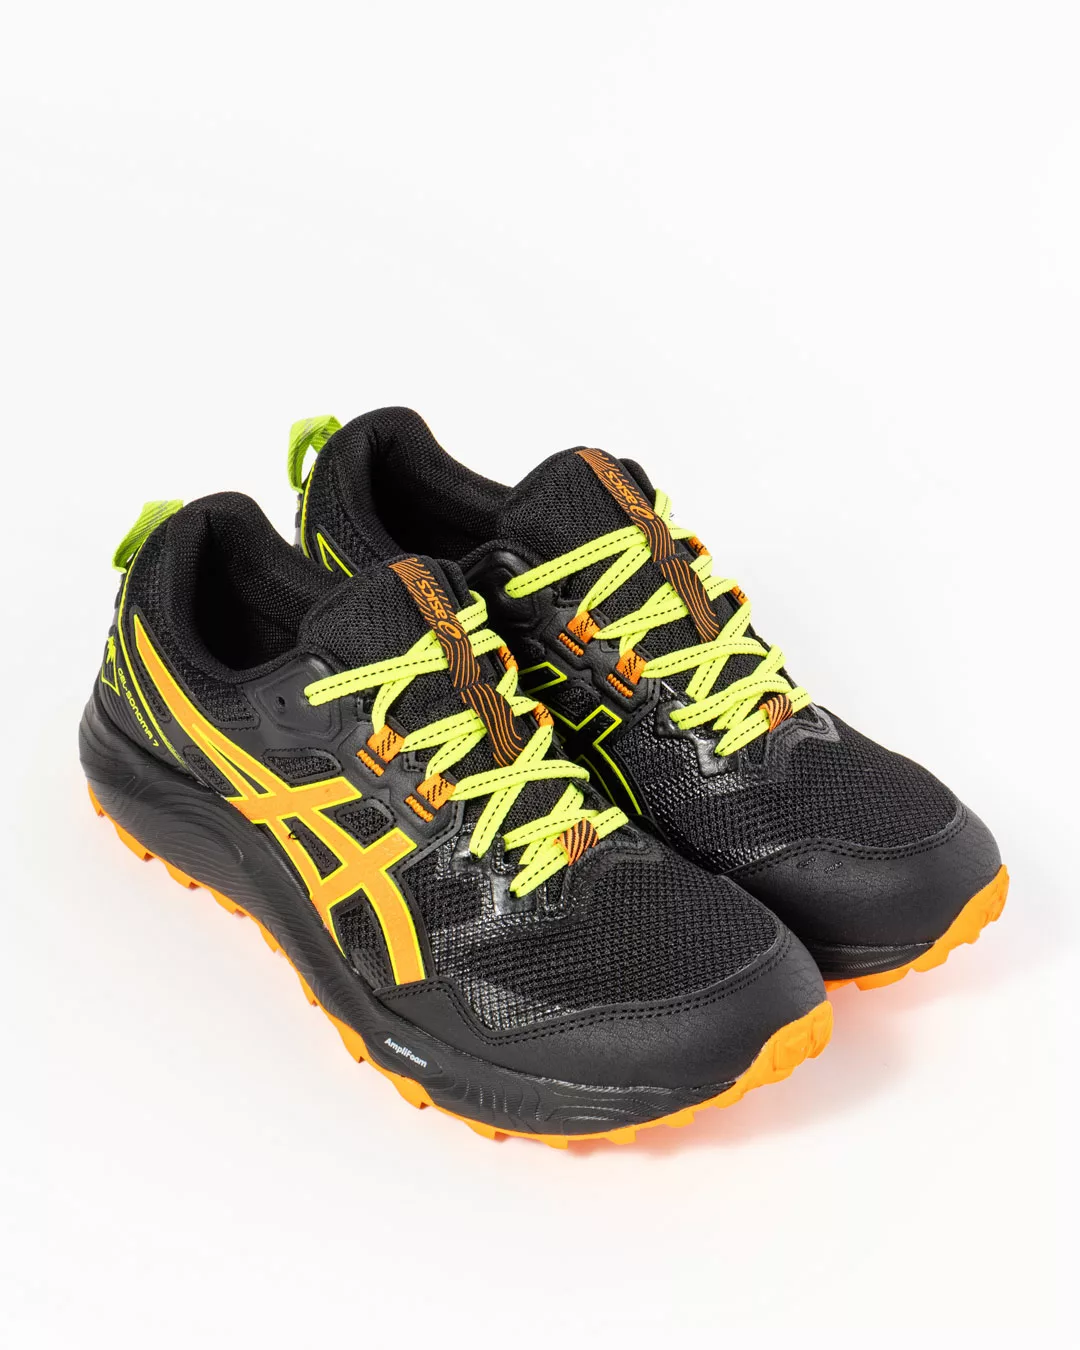 side profile of men's asics trainers in black and bright orange with bright orange laces and asics logo on vamp in bright orange